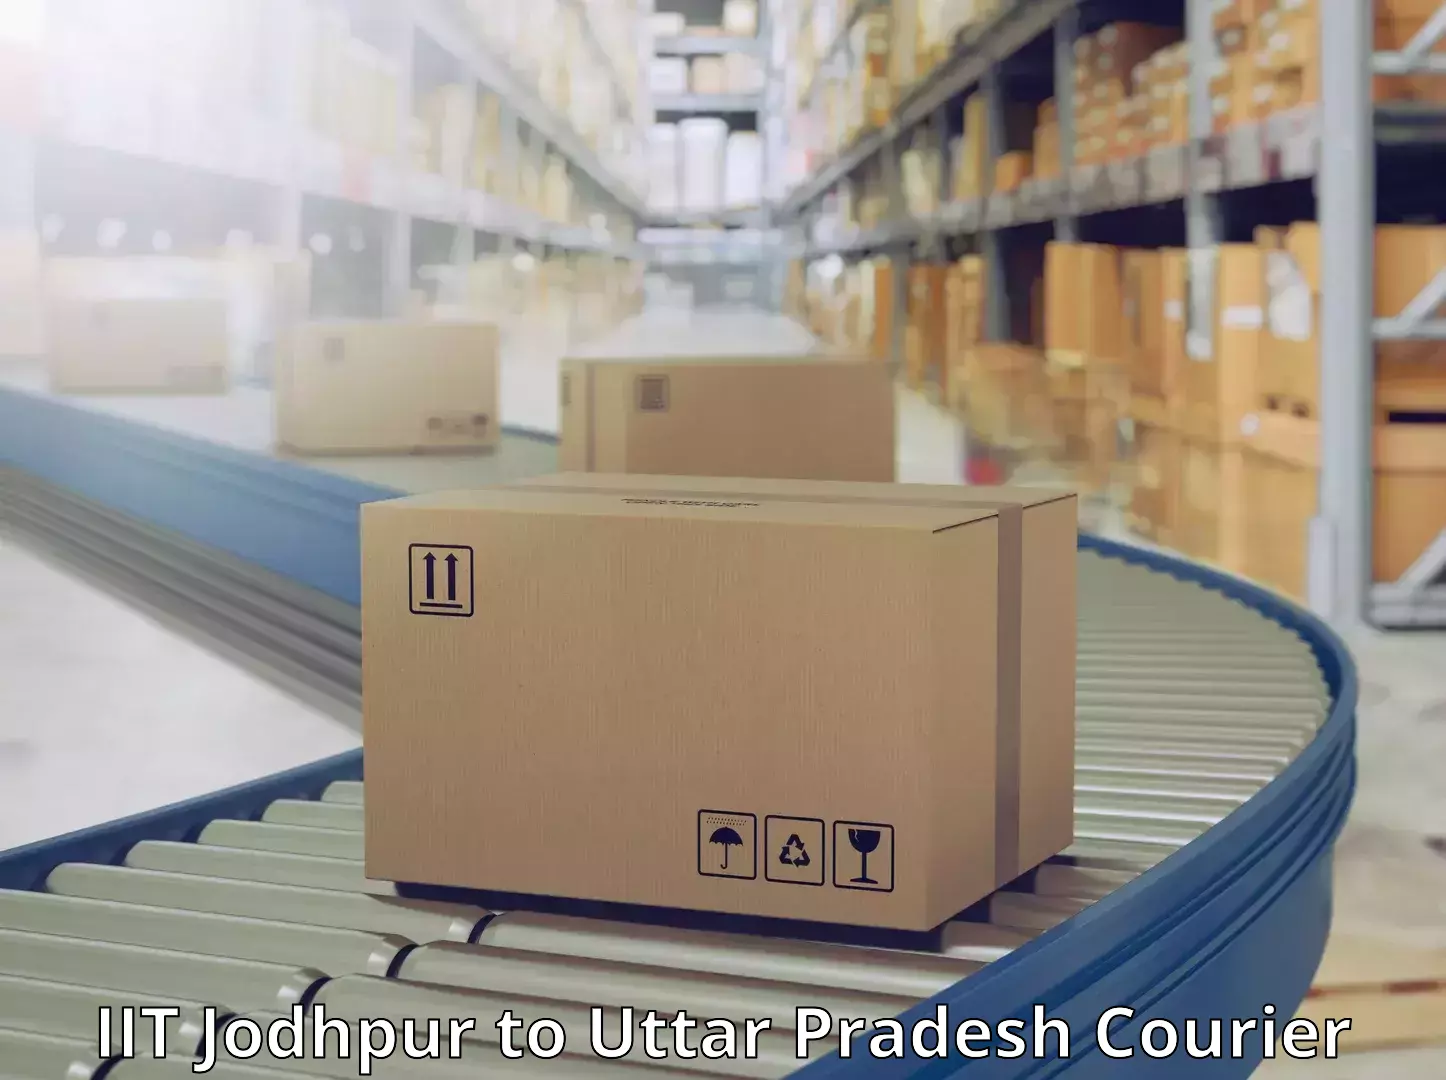 Global delivery options IIT Jodhpur to Lucknow